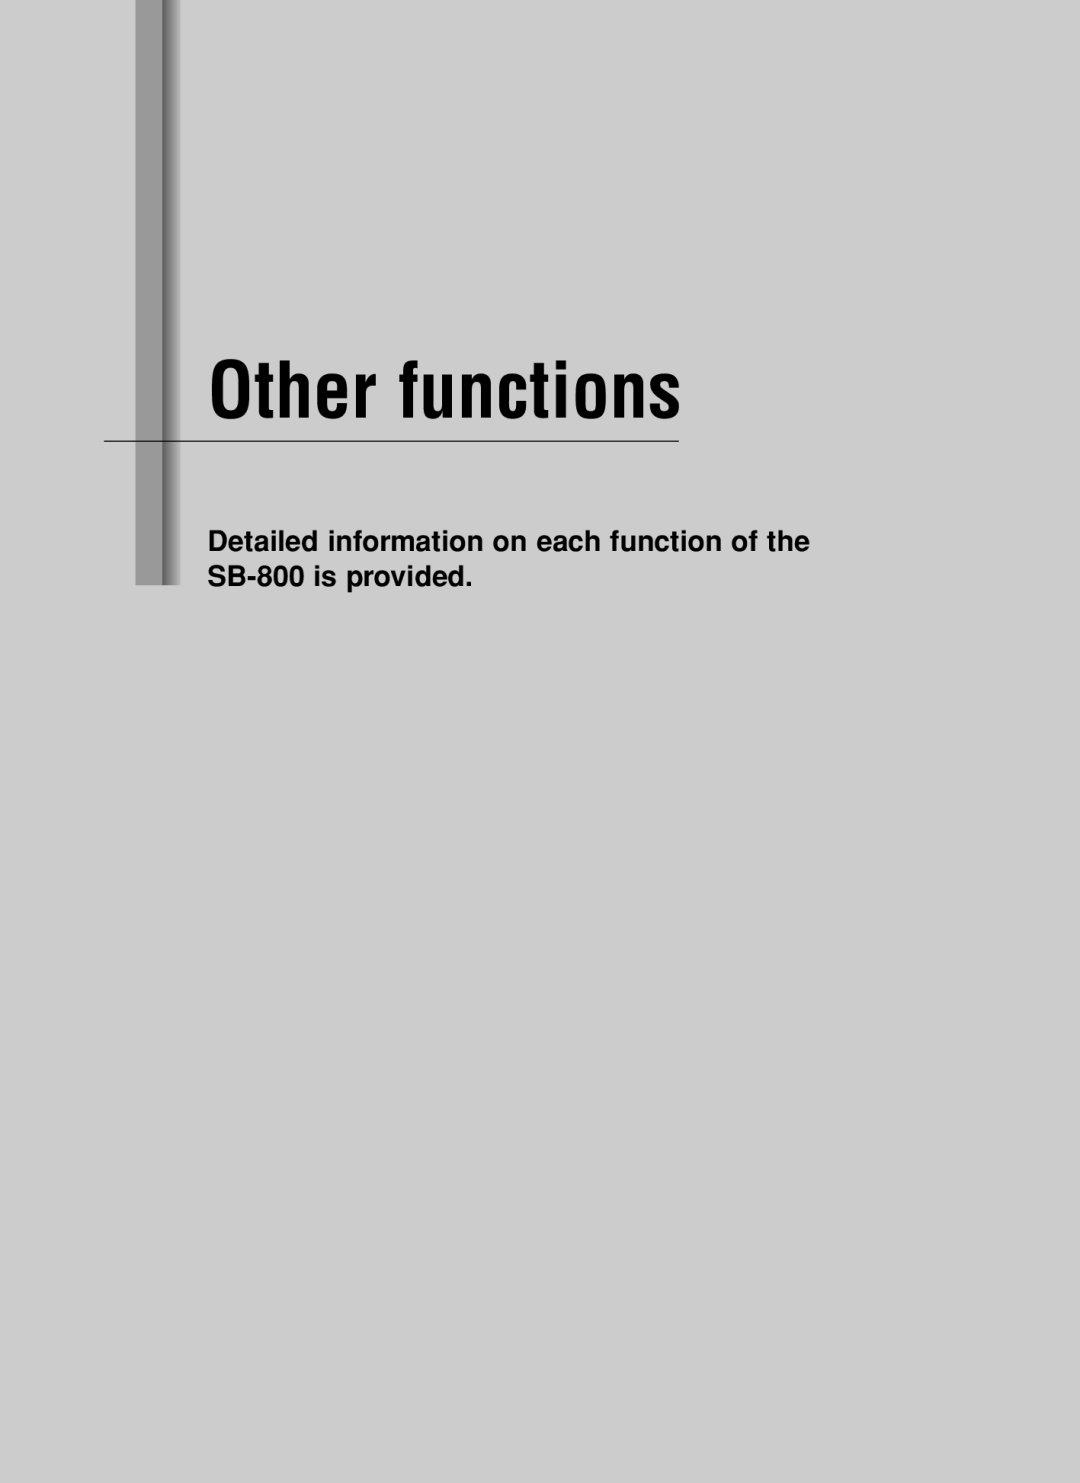 Nikon instruction manual Other functions, Detailed information on each function of the SB-800 is provided 